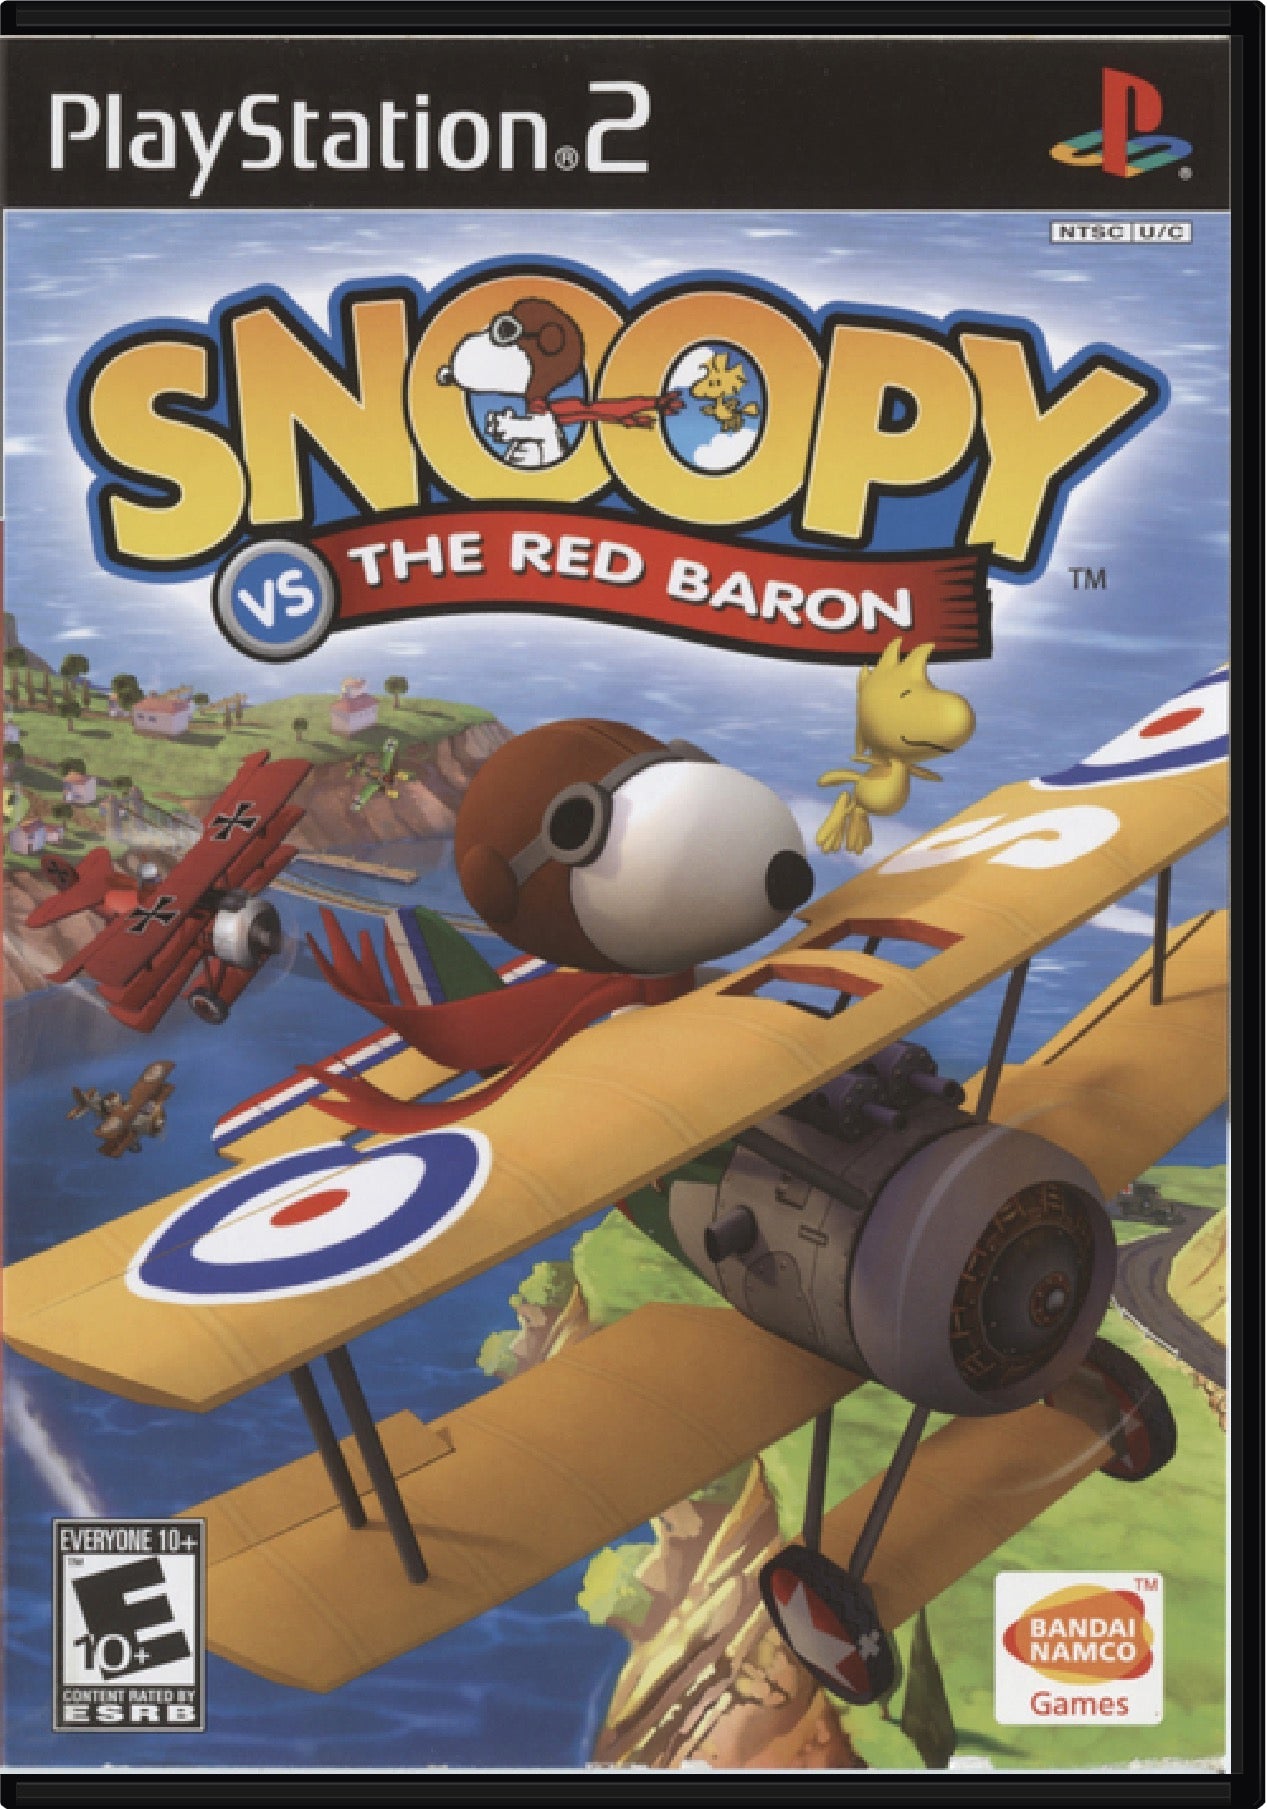 Snoopy vs the Red Baron Cover Art and Product Photo